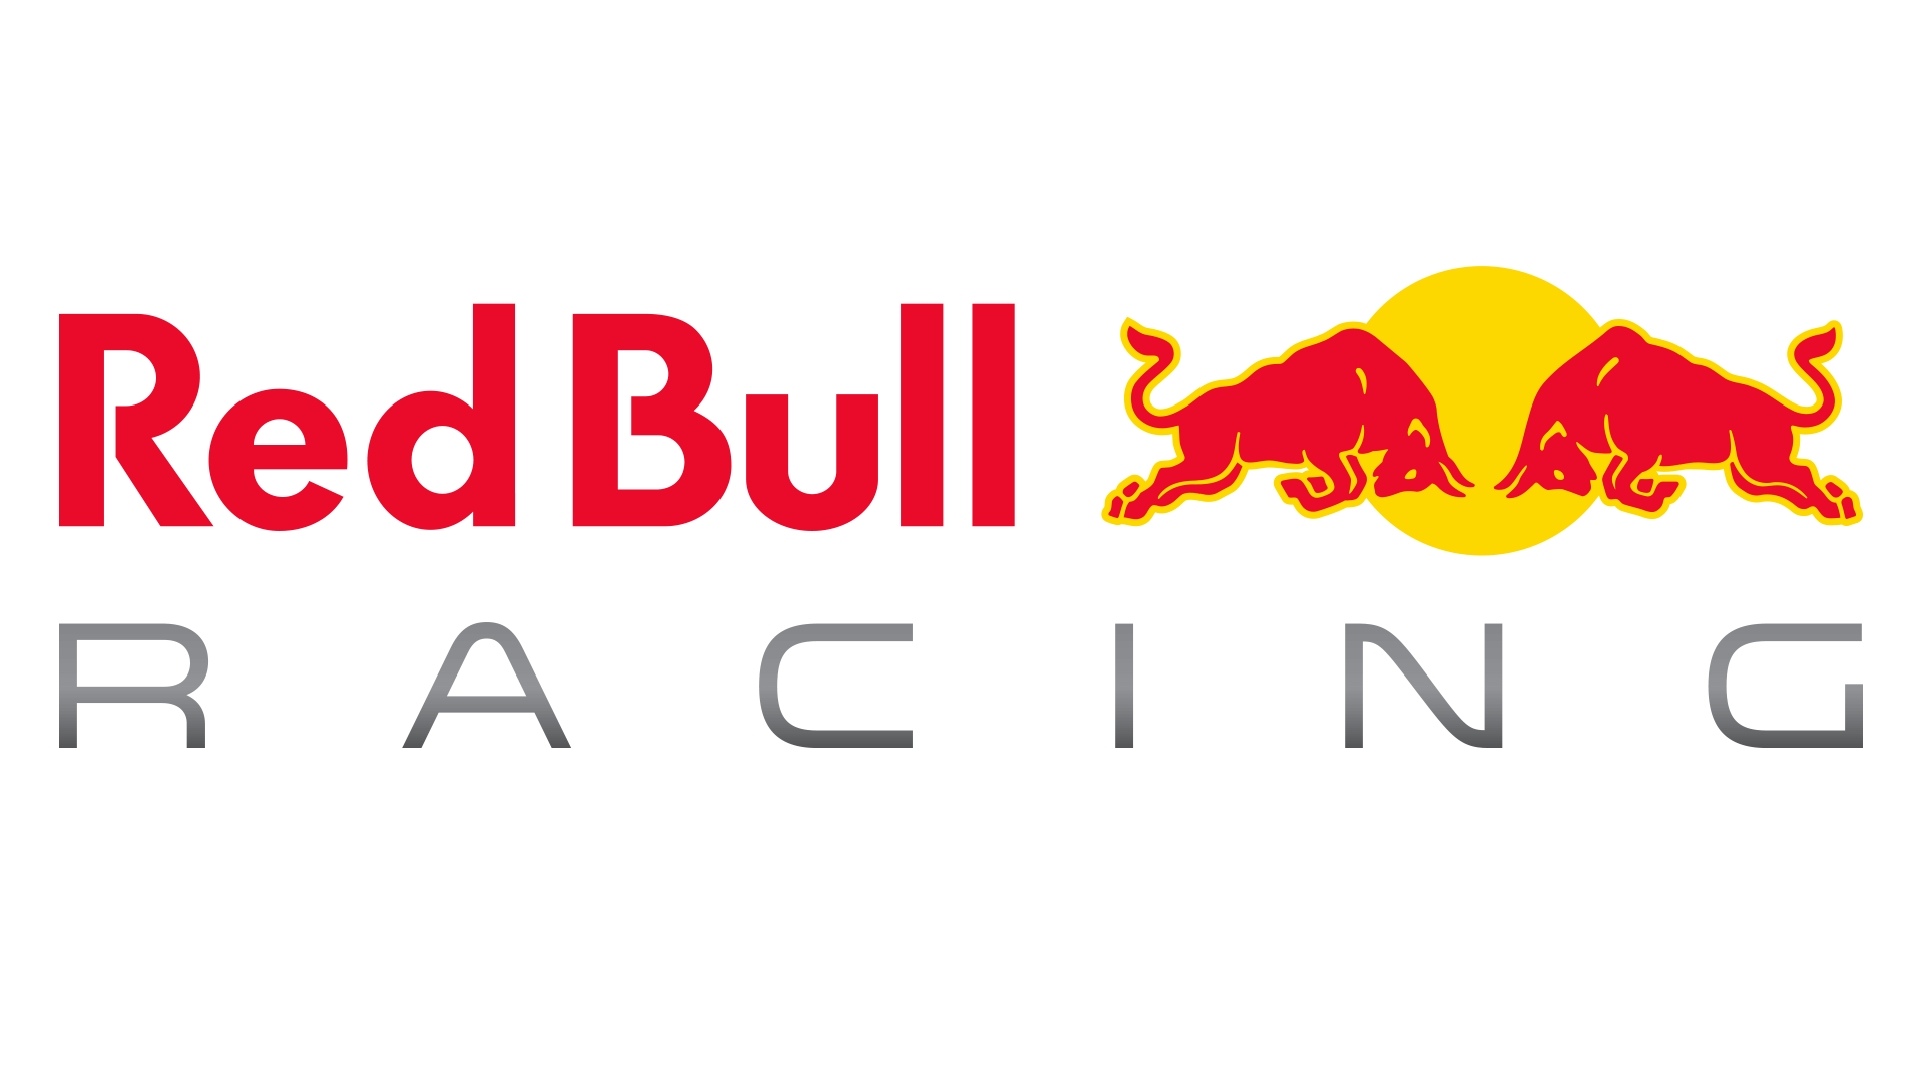 Red Bull F1 Begins Exploring The Us Market With Walmart Partnership